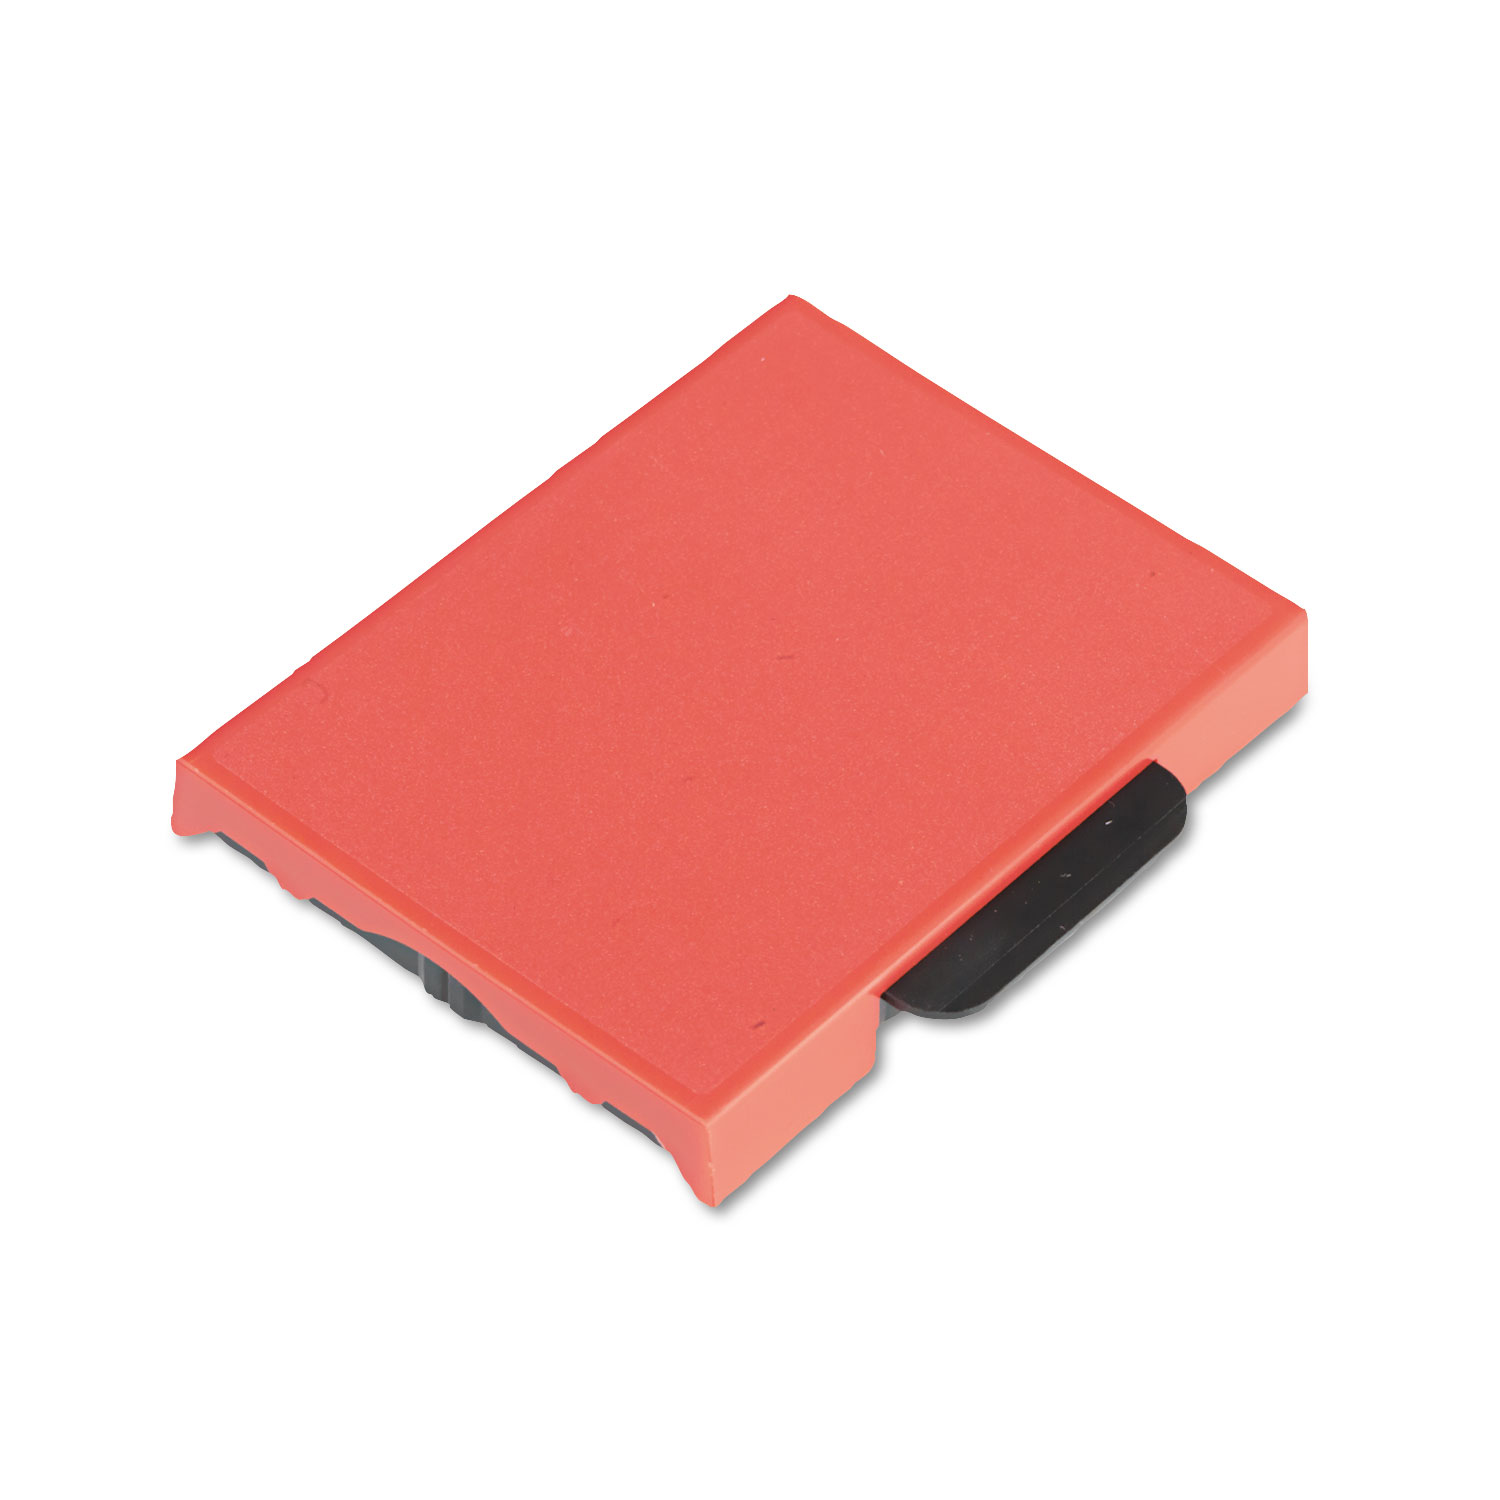  Identity Group P5470RE T5470 Dater Replacement Ink Pad, 1 5/8 x 2 1/2, Red (USSP5470RD) 